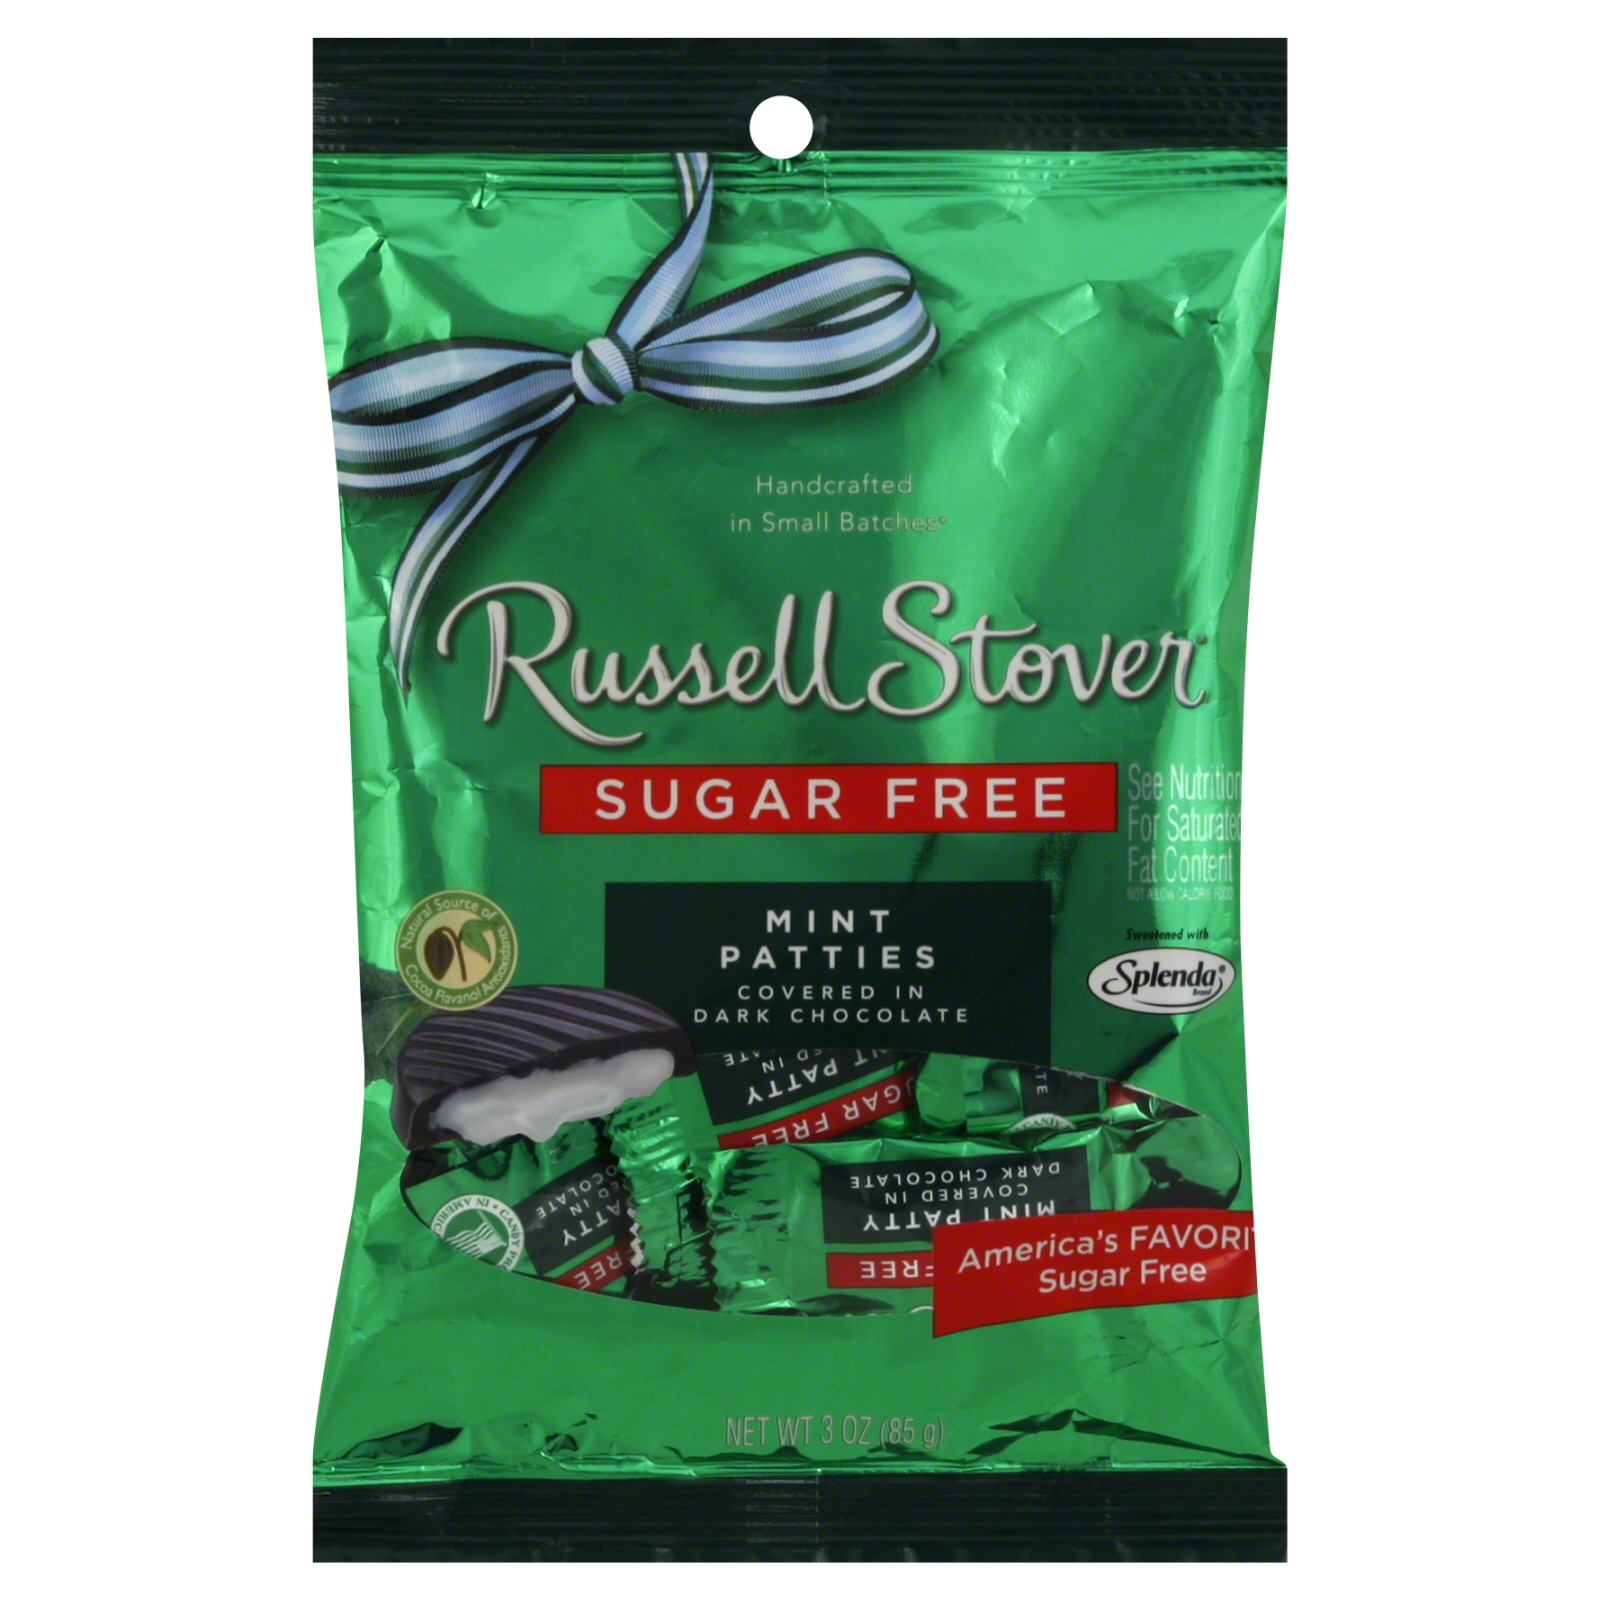 Russell Stover Sugar Free Mint Patties, 3 oz (85 g)